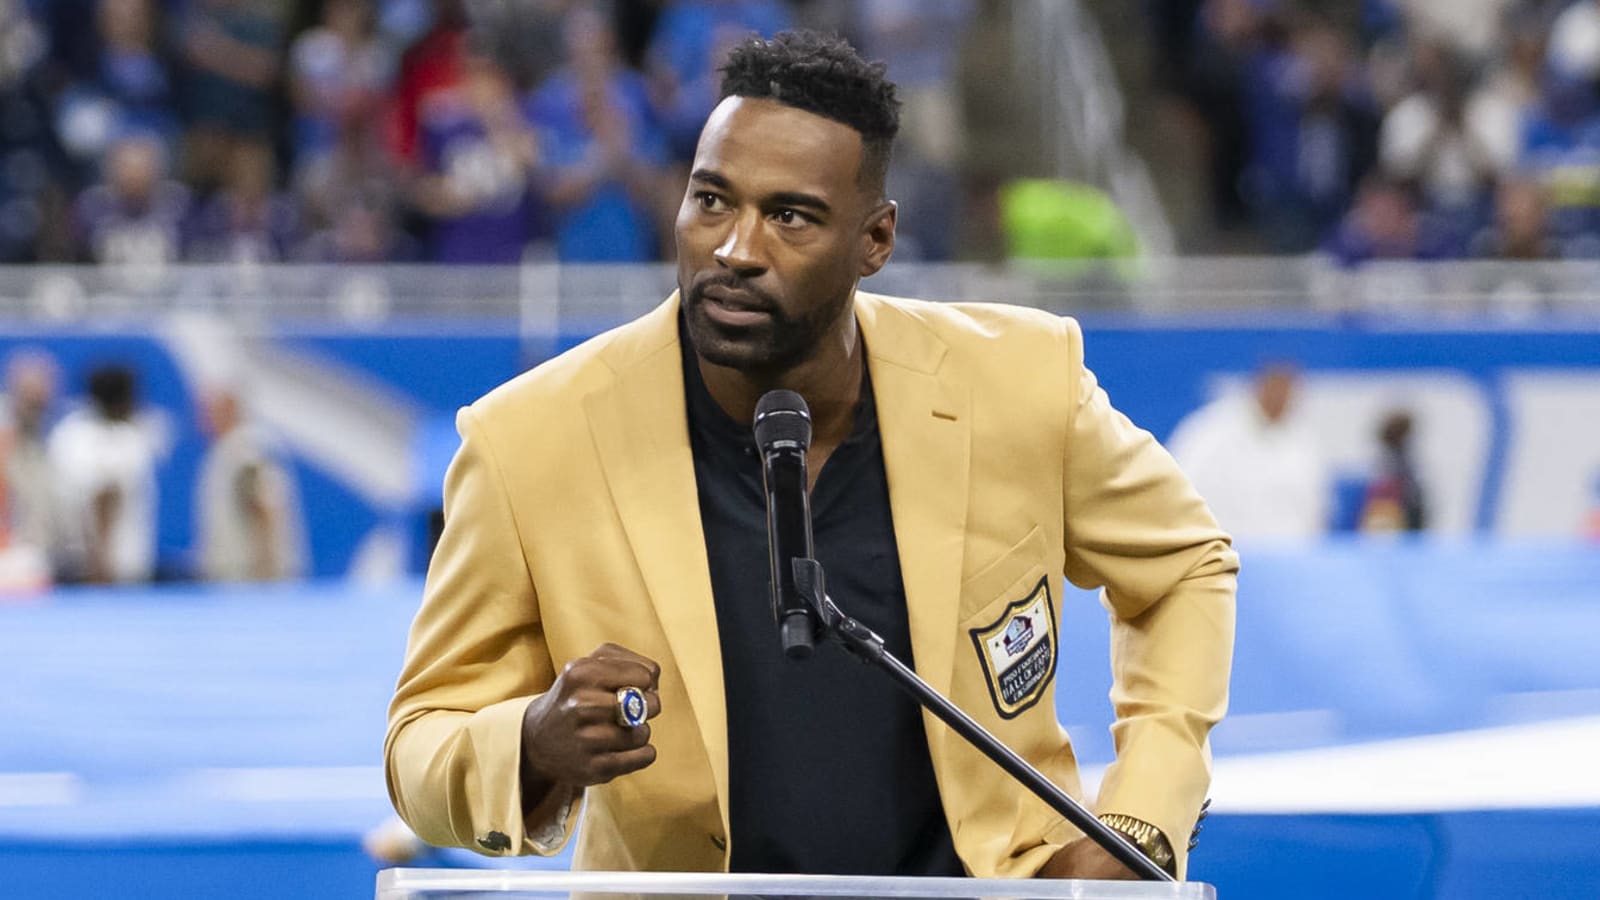 Calvin Johnson appears to have buried hatchet with Lions